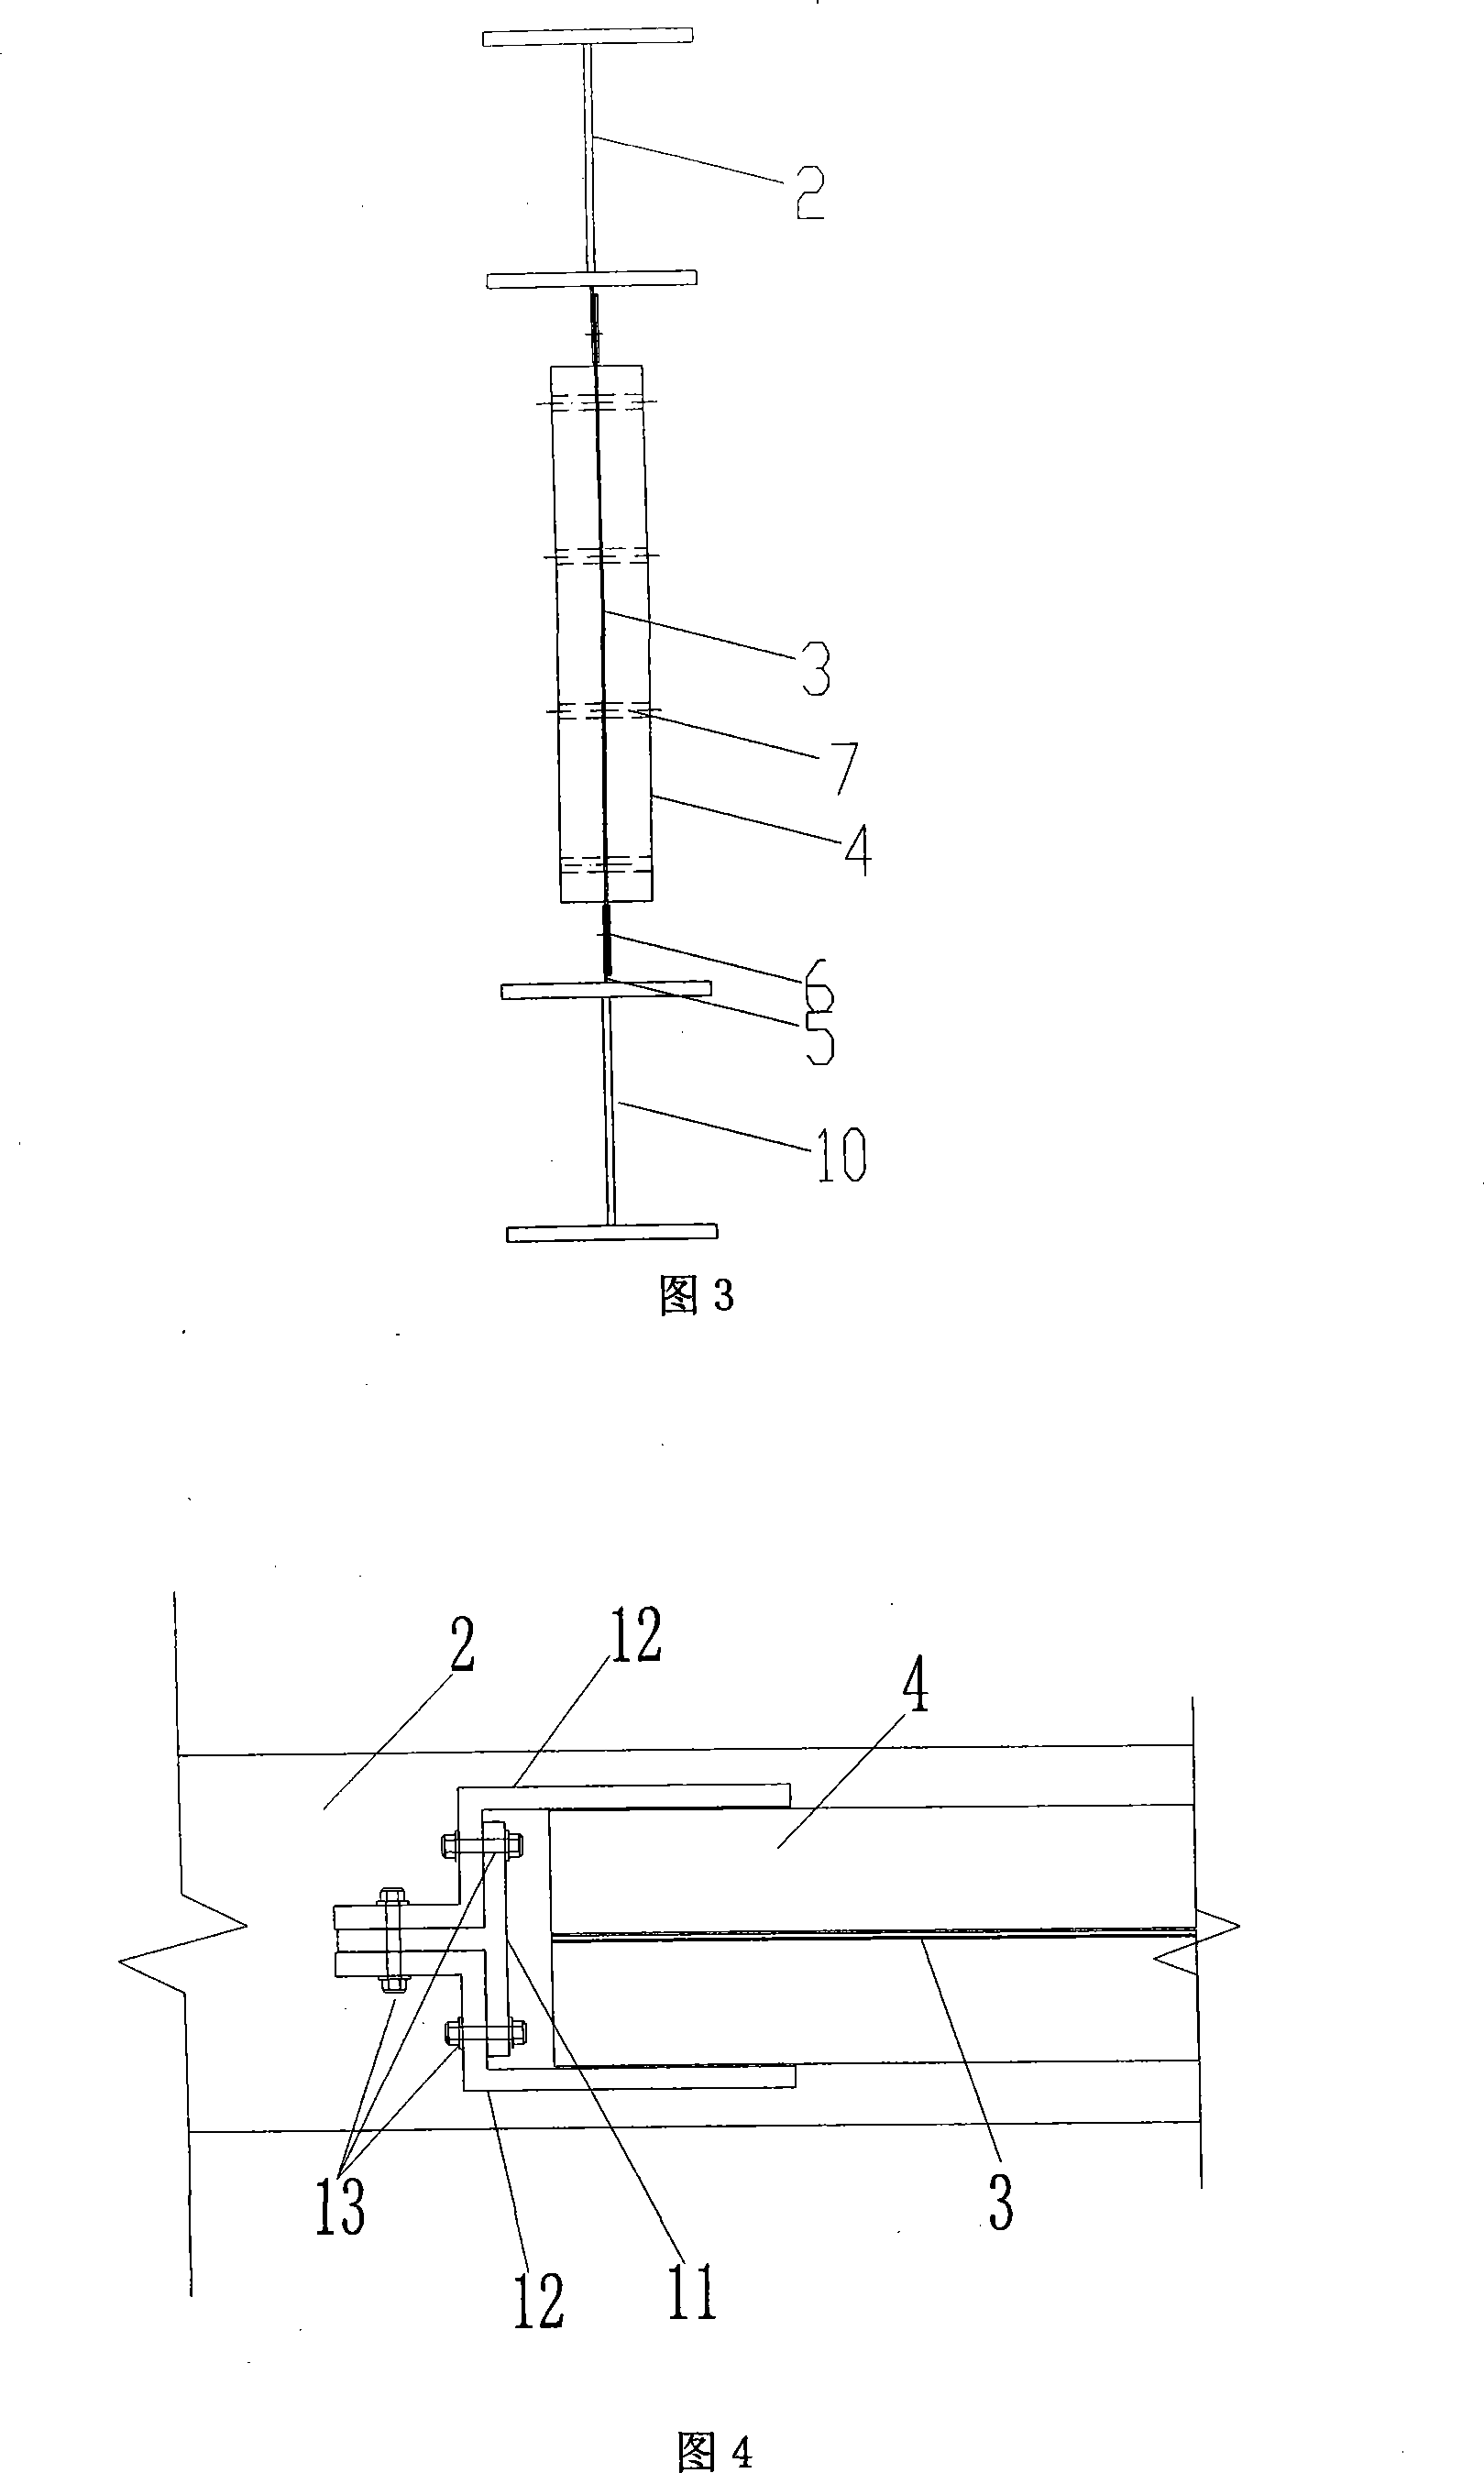 Two-side-connection combined steel plate shearing force wall